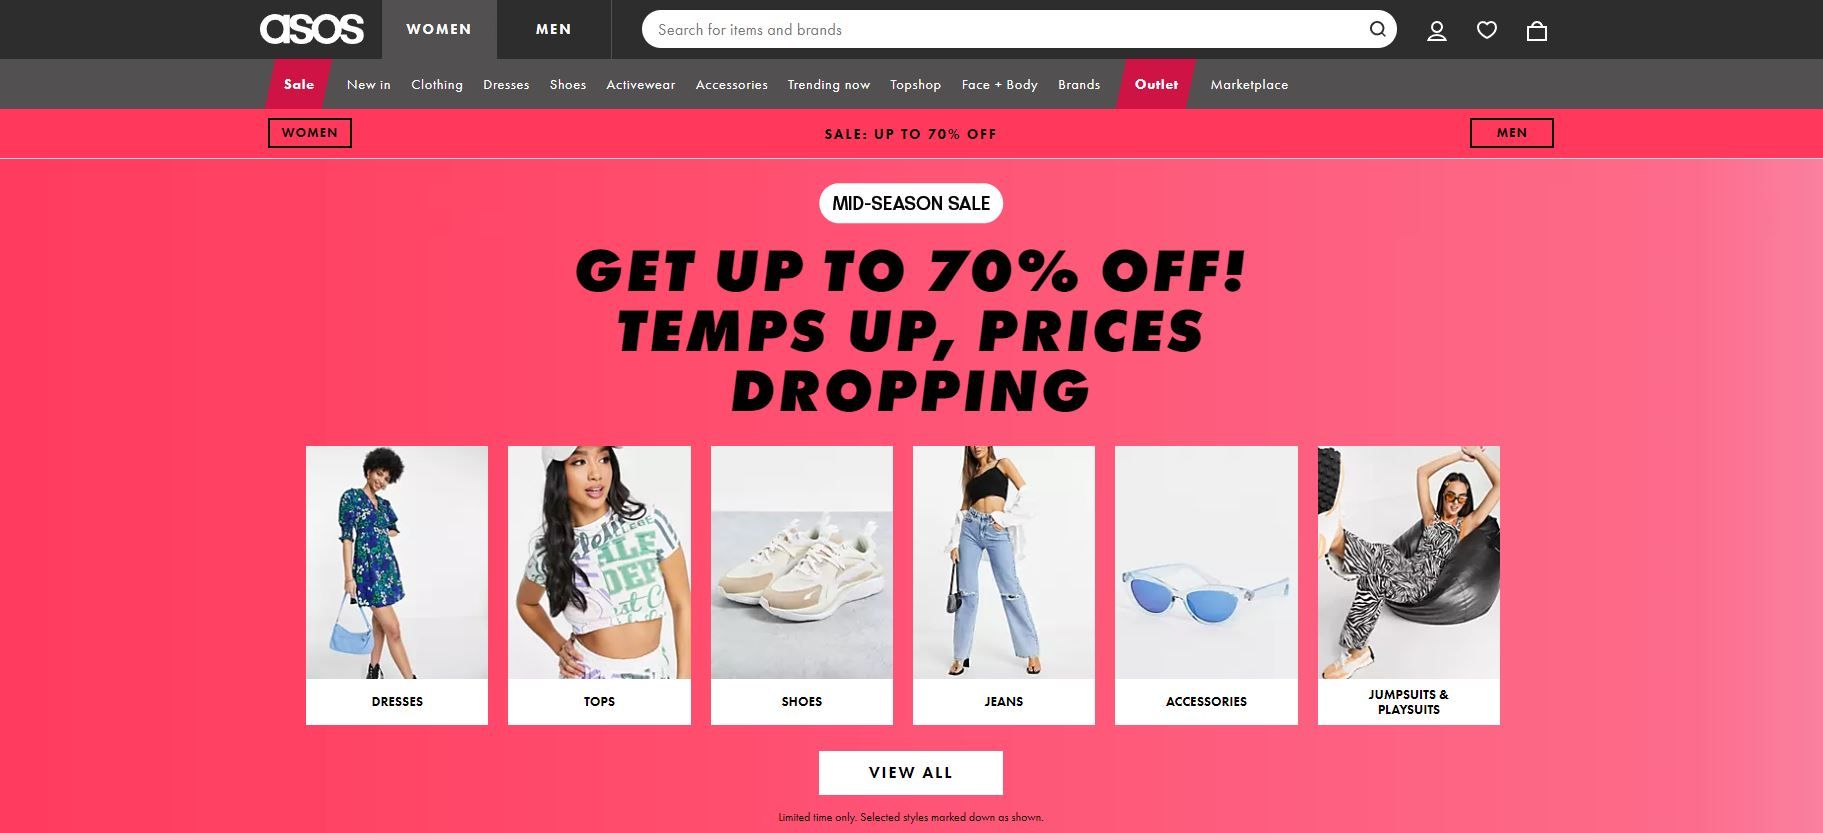 SHEIN-Shopping Online - ClearOS Mobile Marketplace - ClearOS Mobile  Marketplace